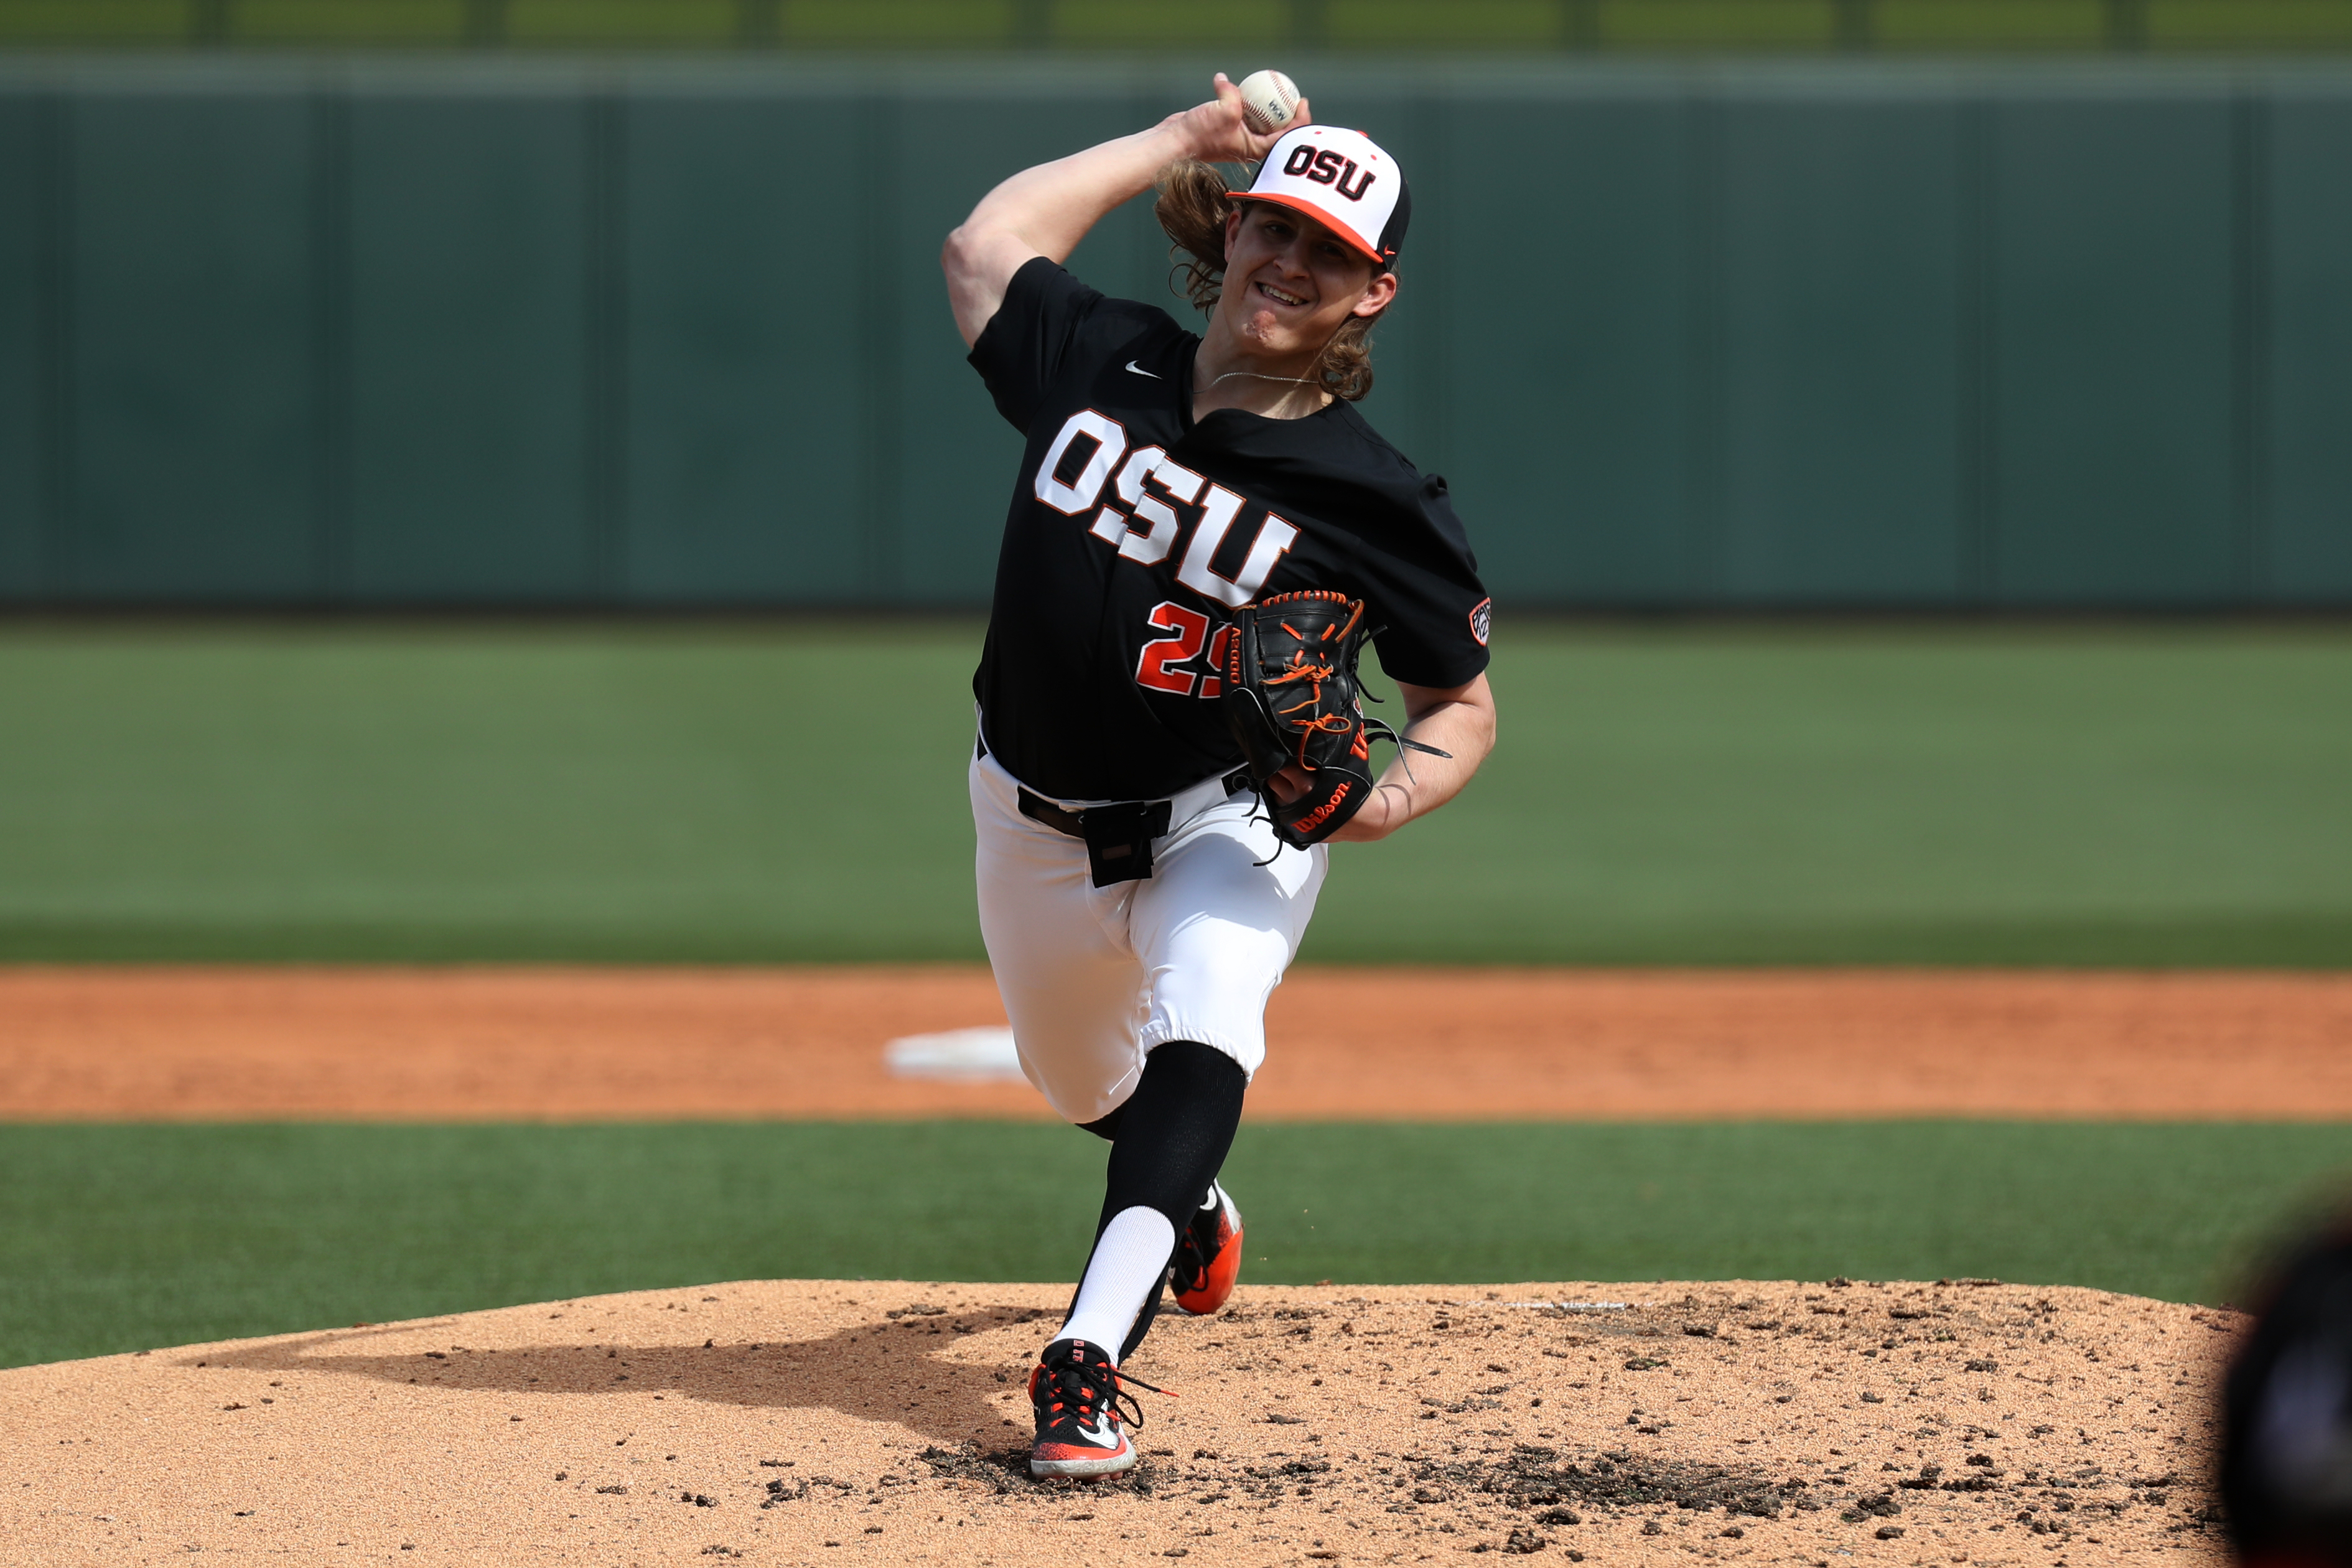 OSU Baseball: Oklahoma State Cowboys deliver good times on, off field